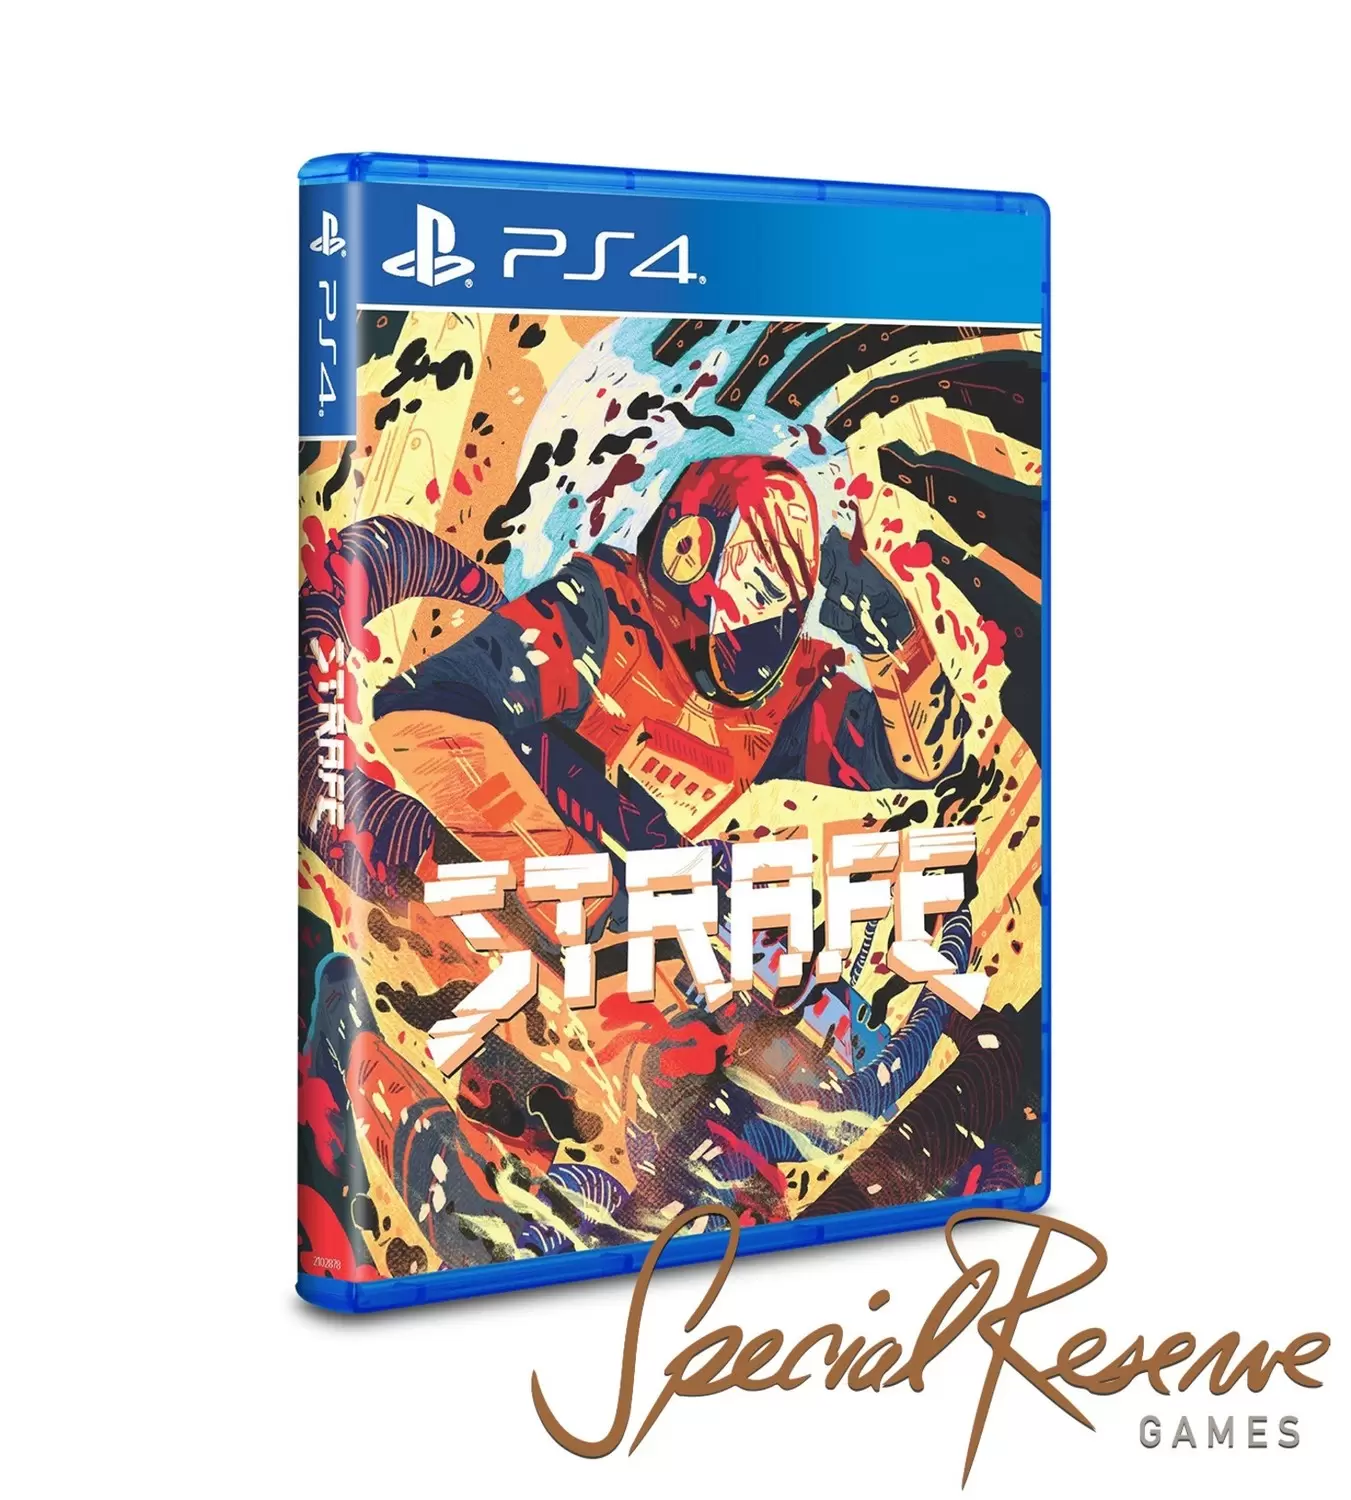 PS4 Games - Strafe - Exclusive Variant